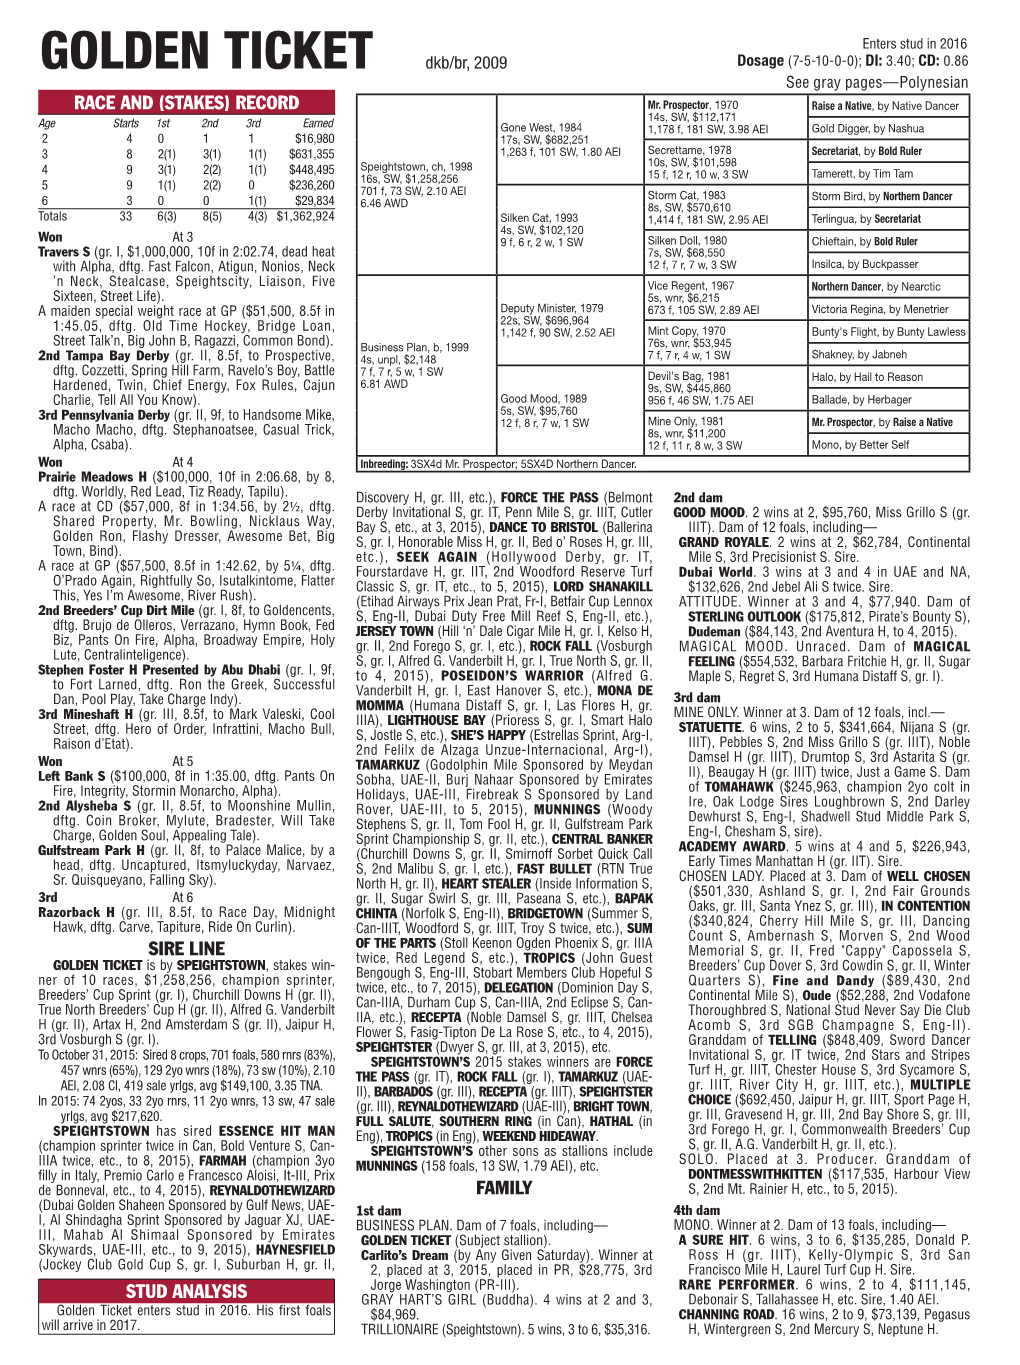 GOLDEN TICKET Dkb/Br, 2009 Dosage (7-5-10-0-0); DI: 3.40; CD: 0.86 See Gray Pages—Polynesian RACE and (STAKES) RECORD Mr